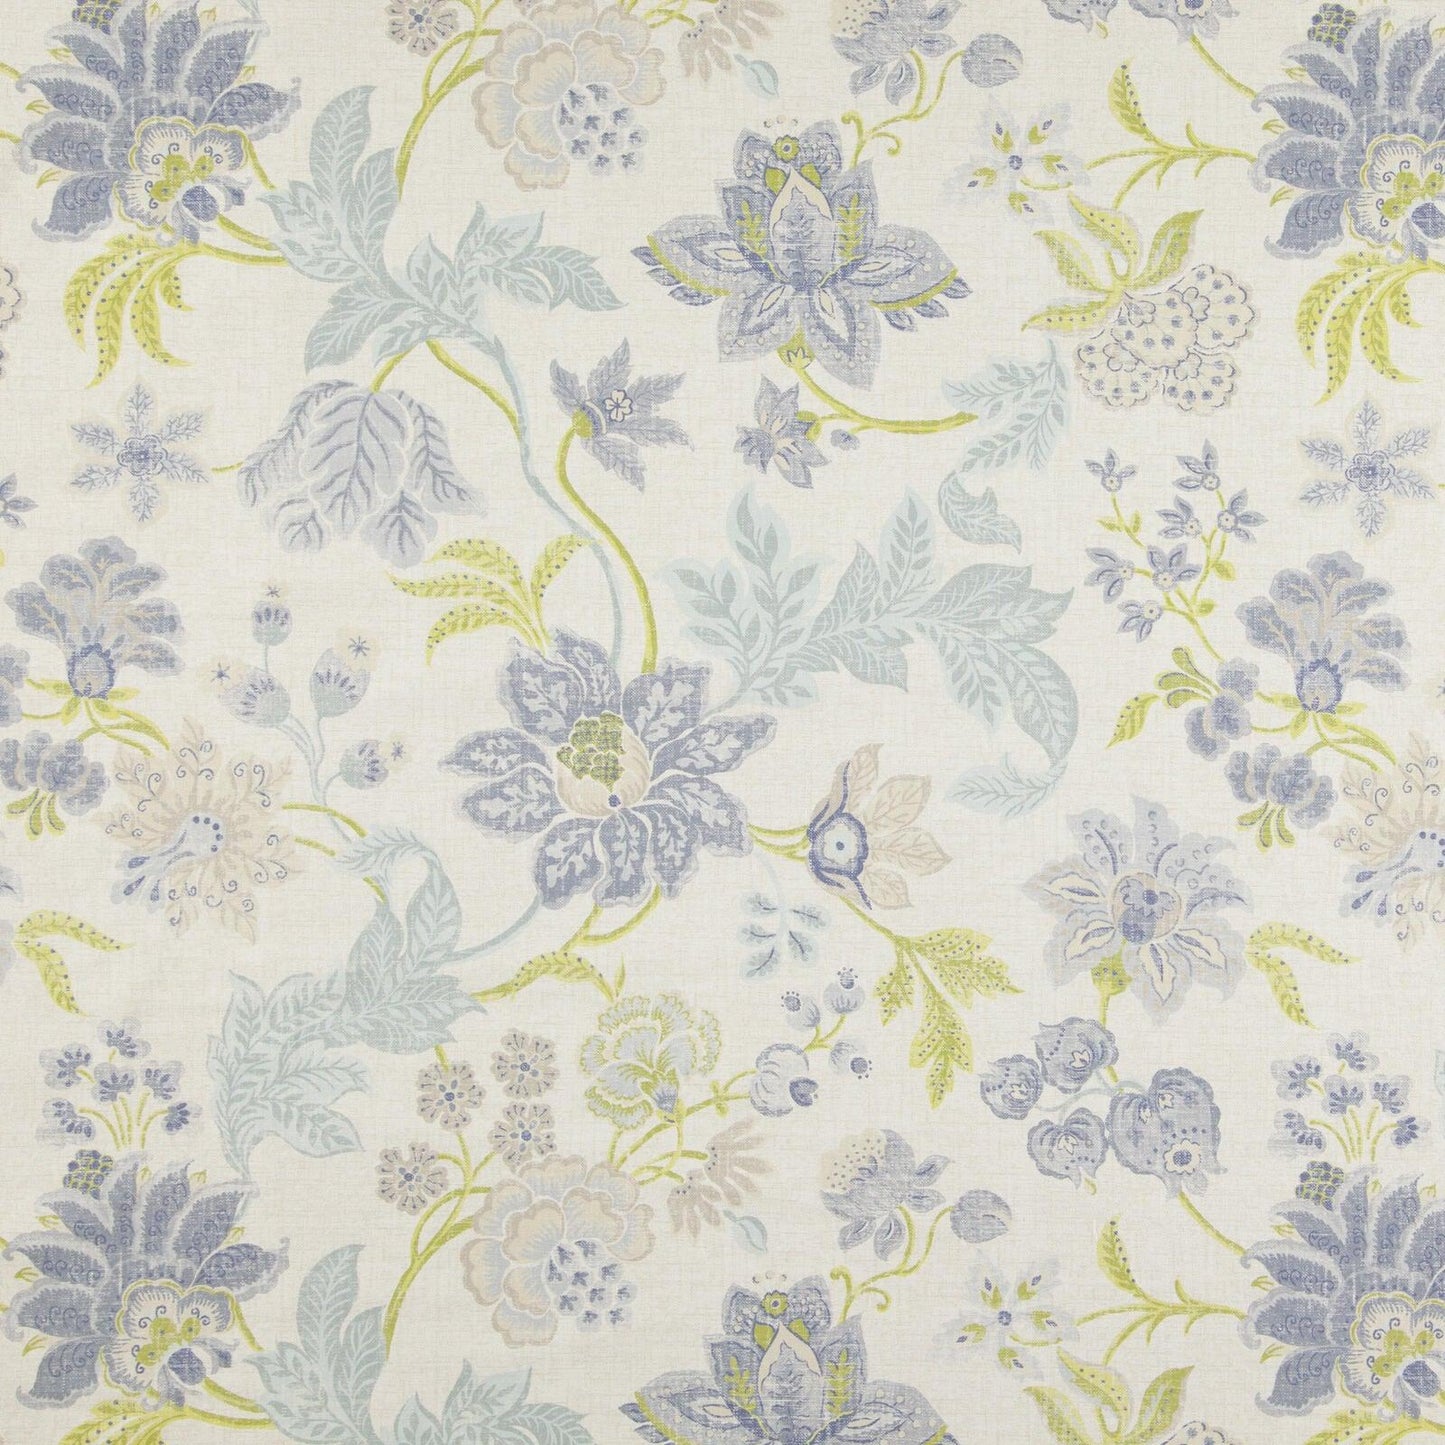 Cotton floral upholstery drapery home decor fabric lavender